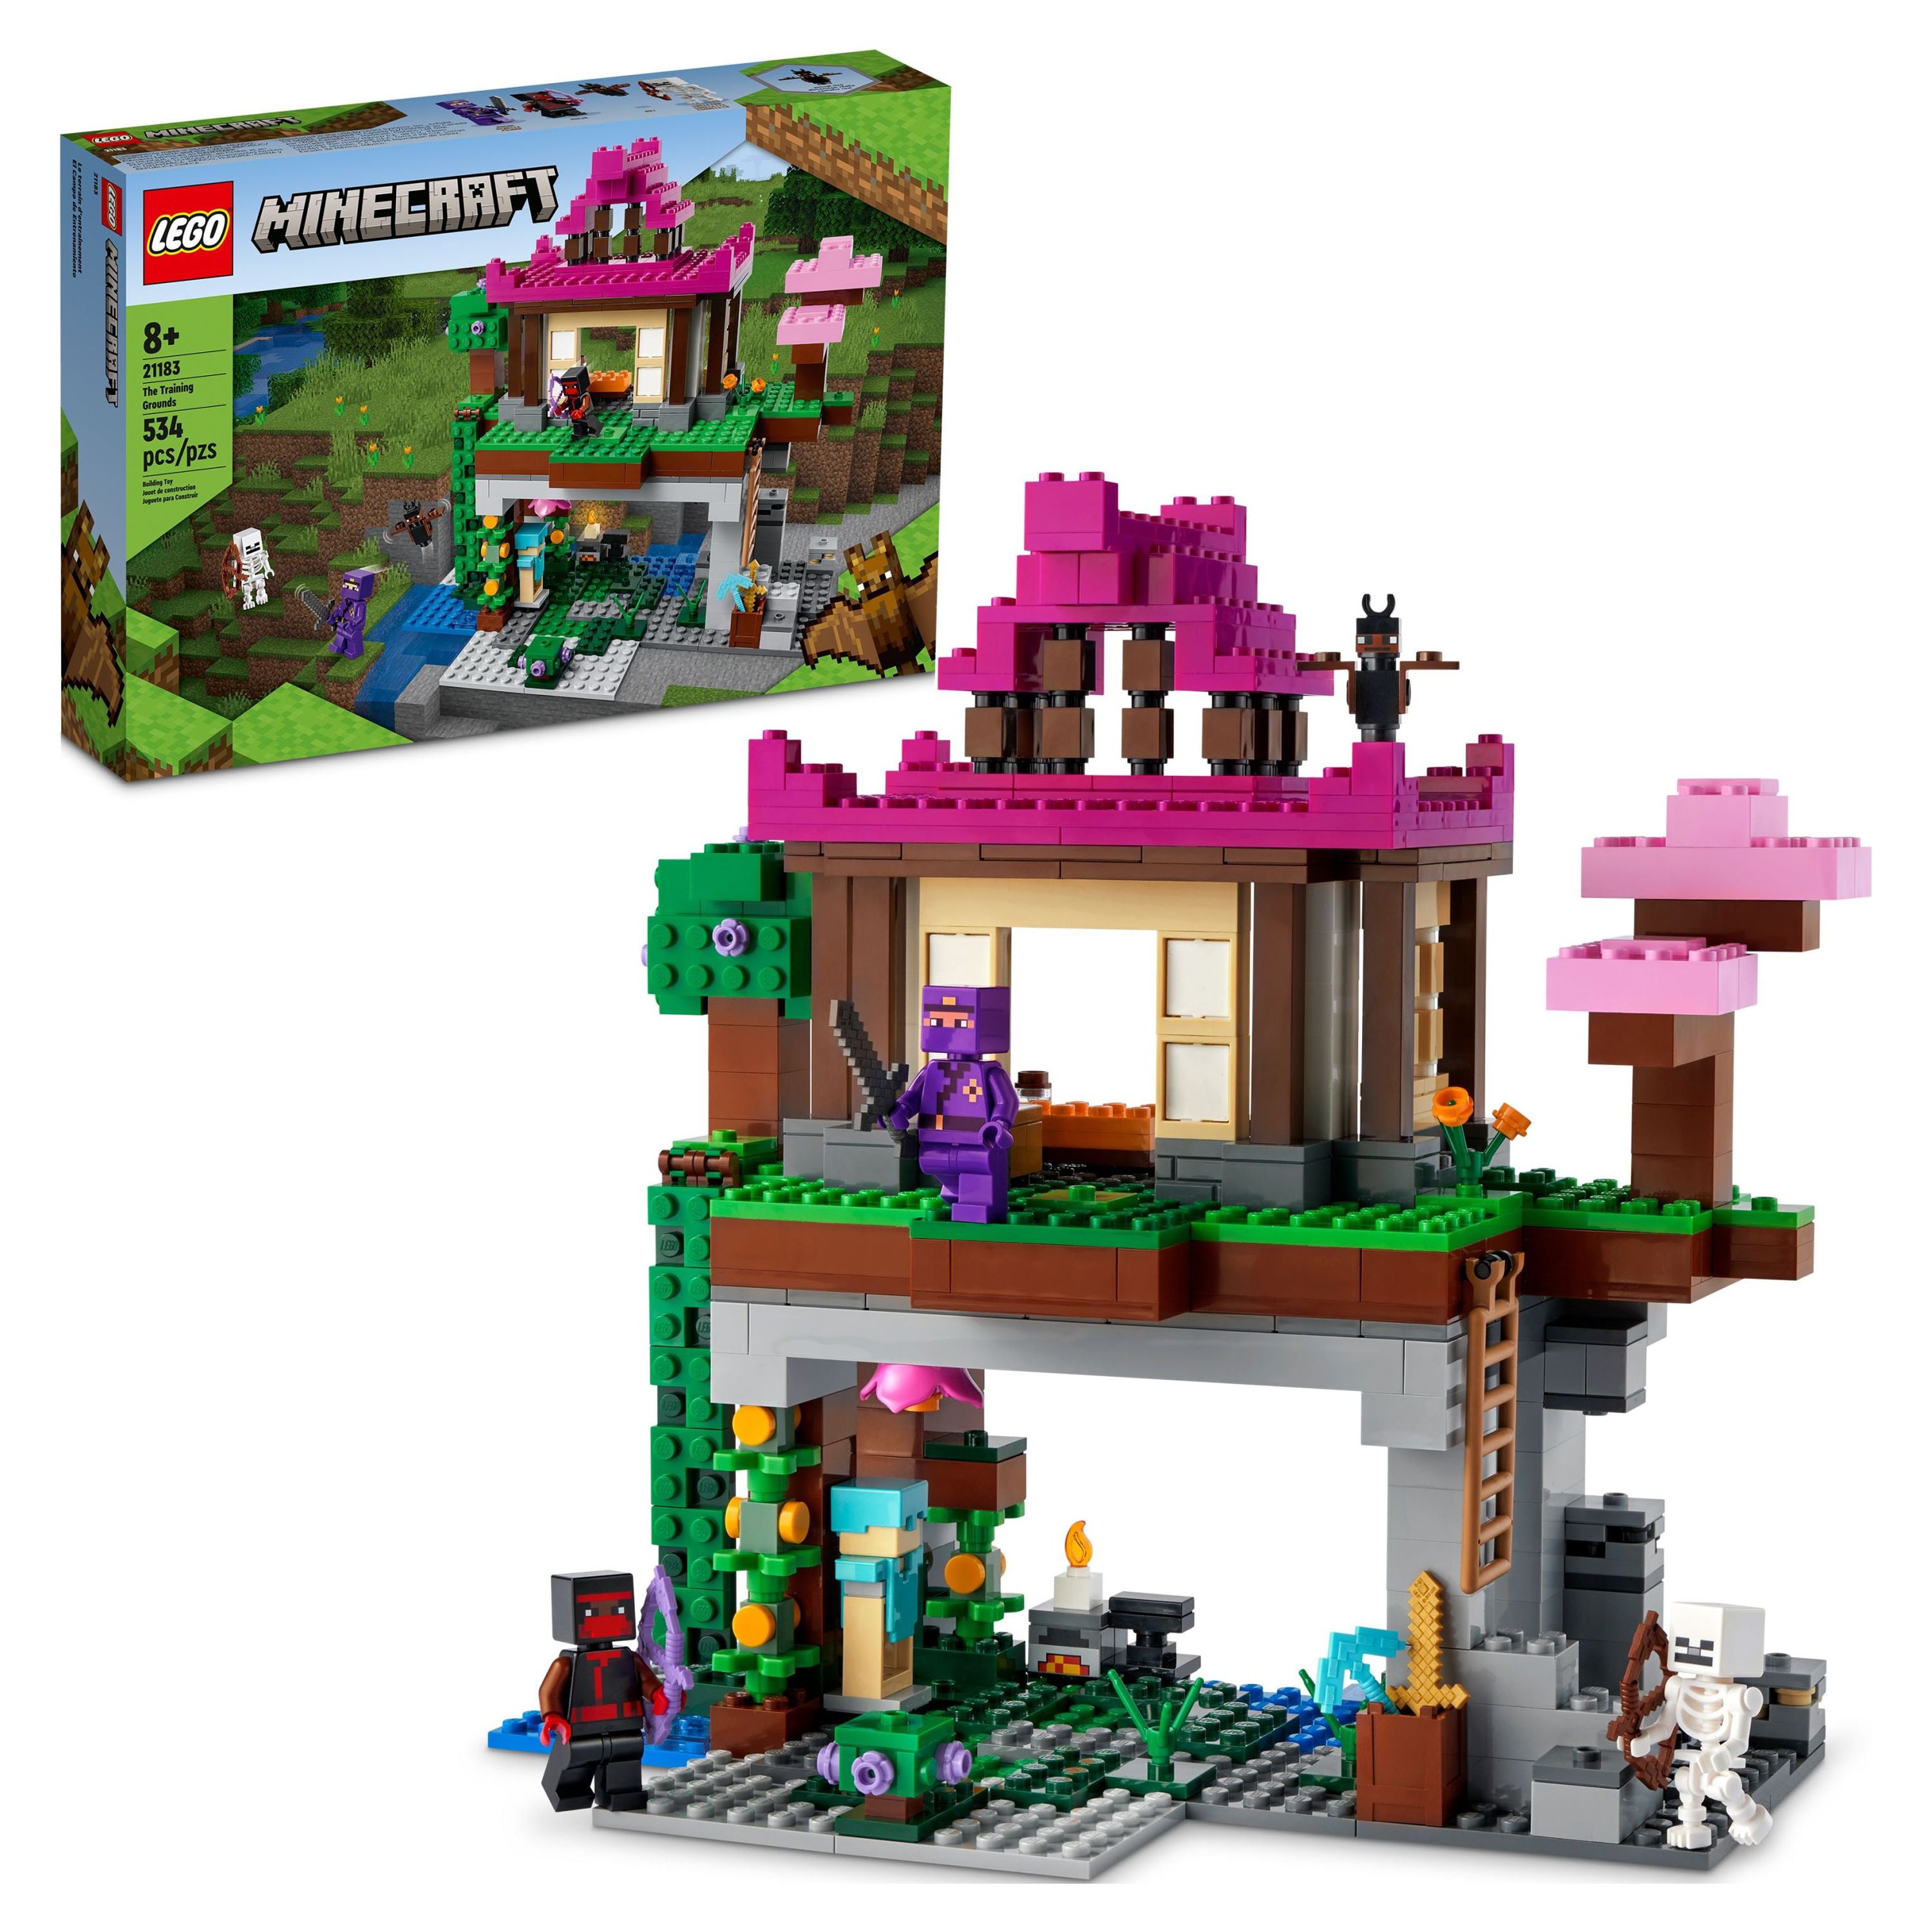 LEGO Minecraft The Training Grounds House Building Set, 21183 Cave Toy - image 1 of 8